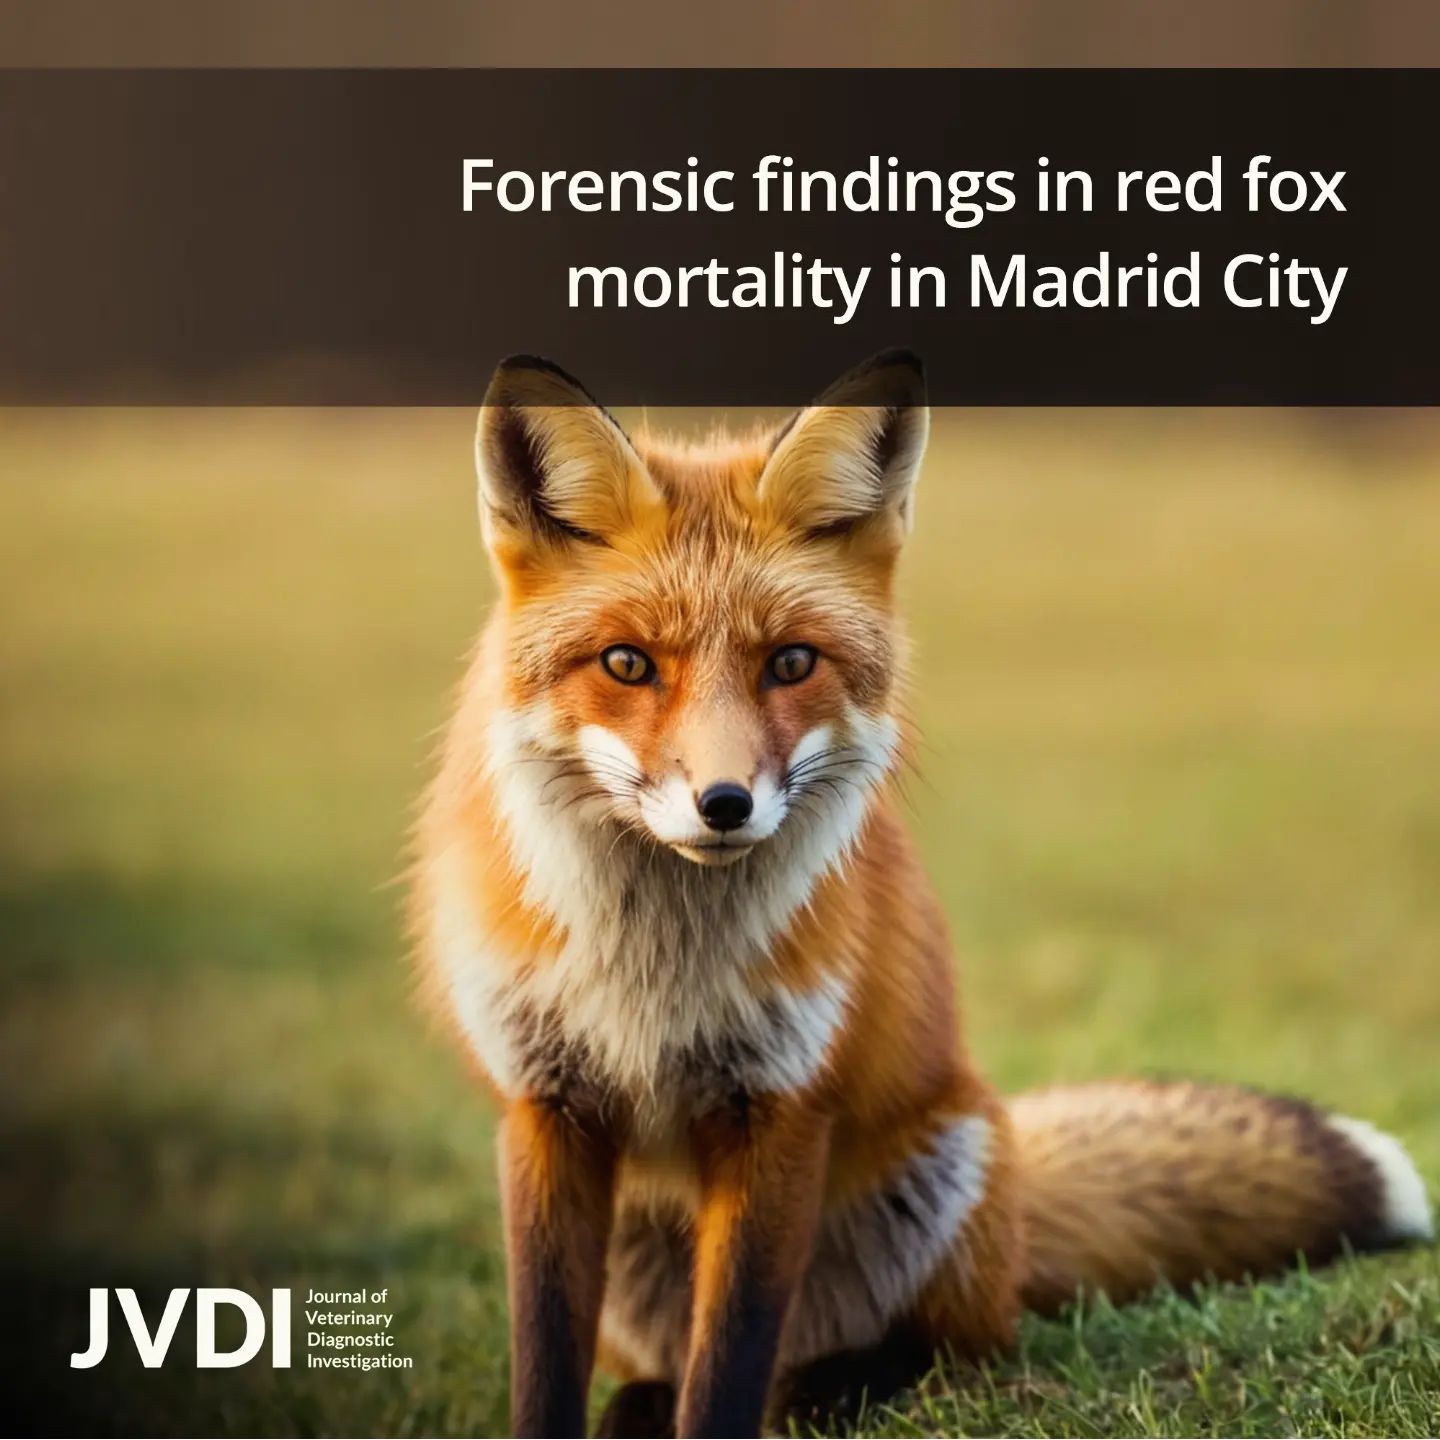 Forensic findings in urban red fox mortality in the metropolitan area of Madrid, 2014-2022